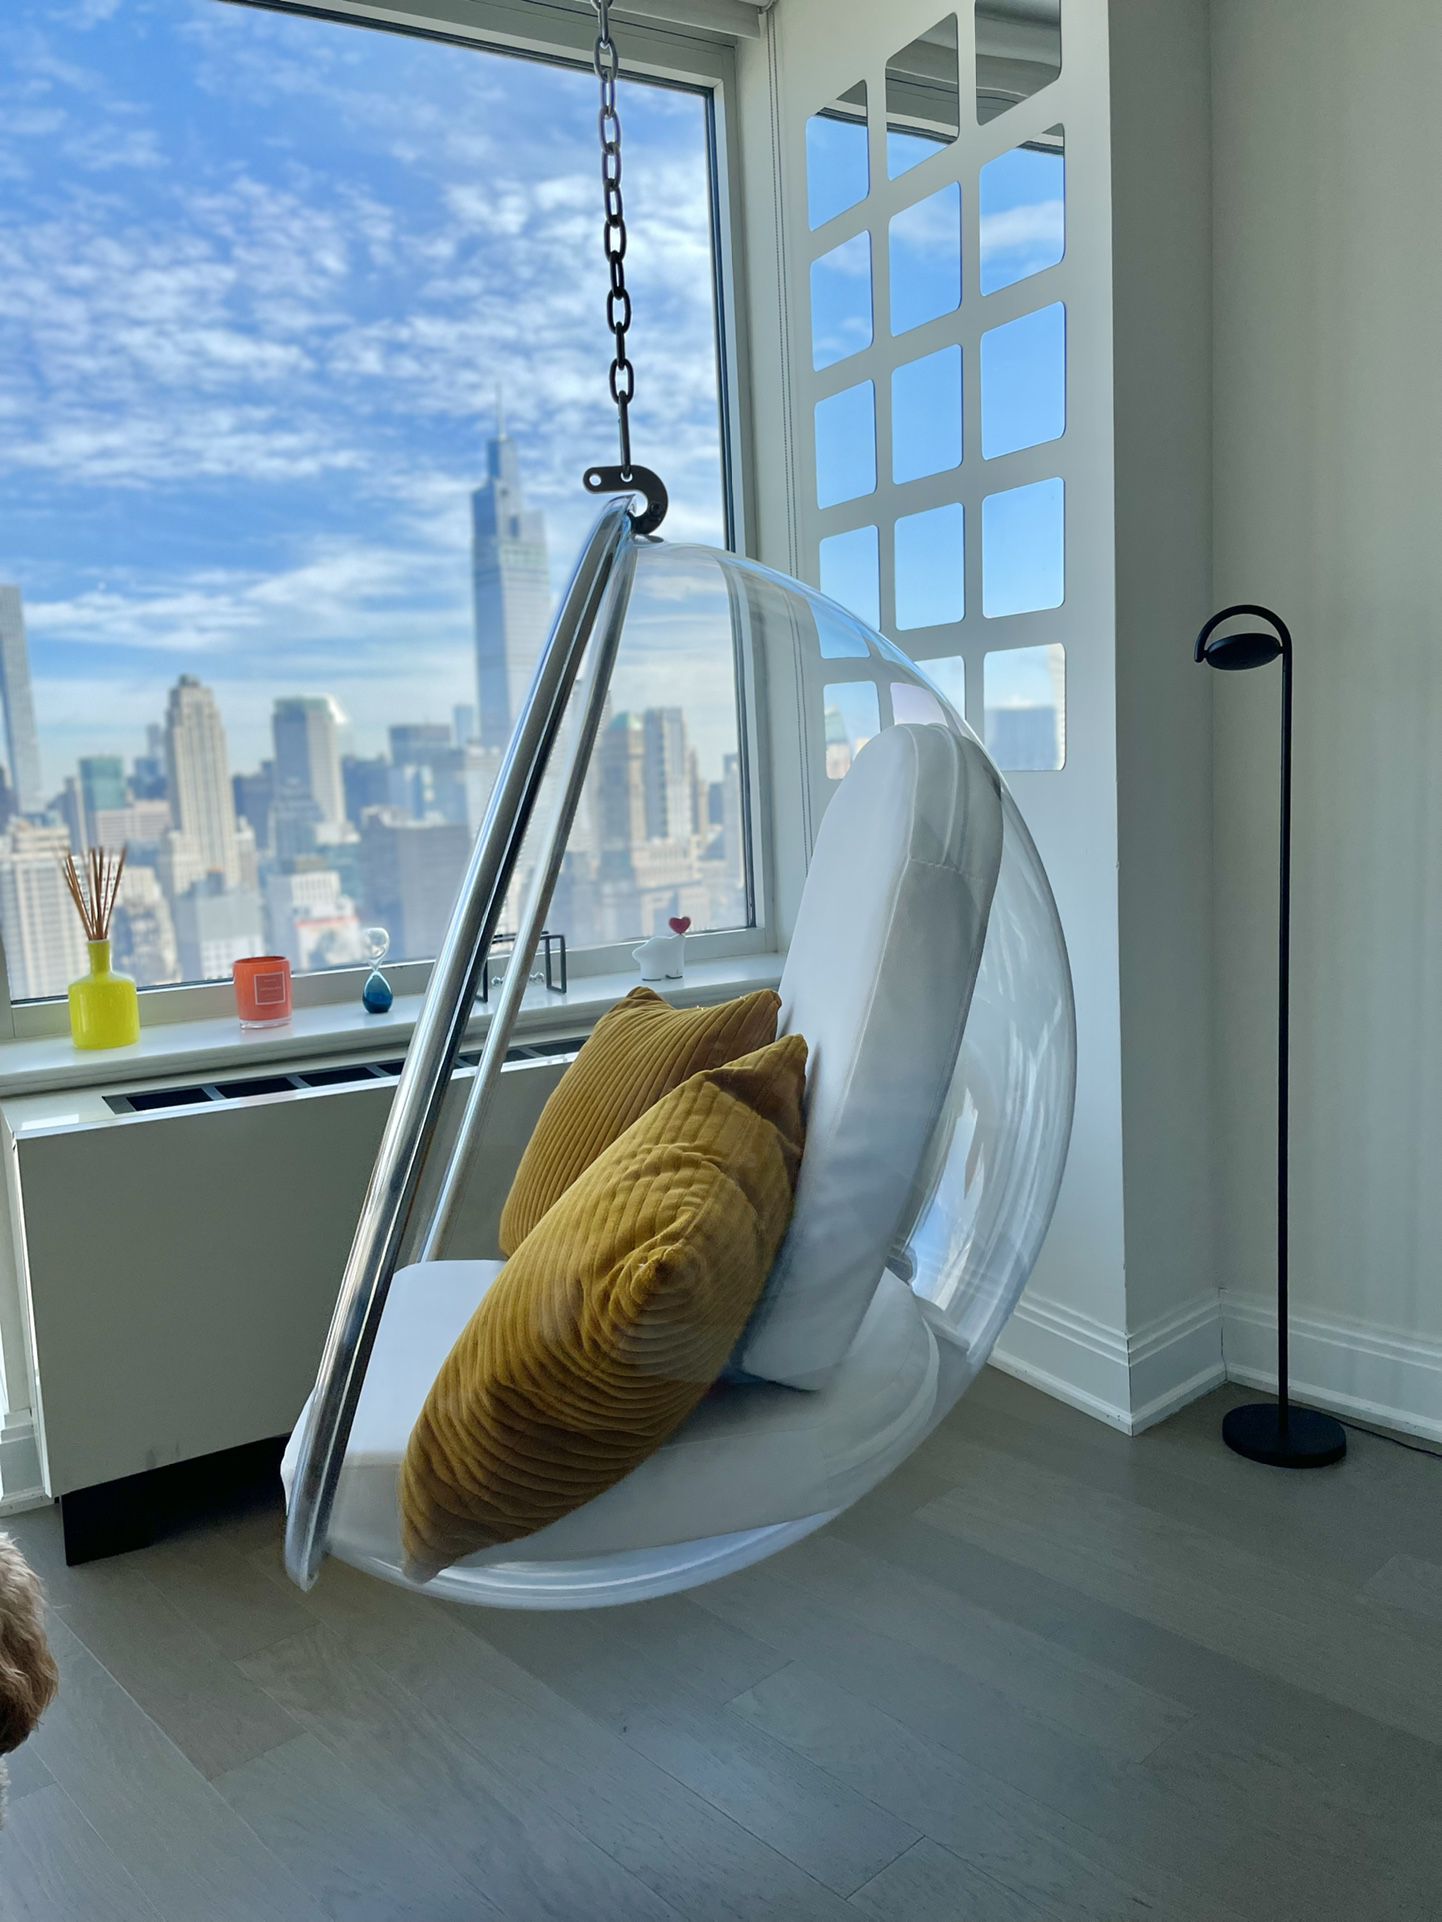 Amazing Deal - Unique Hanging Balloon Chair